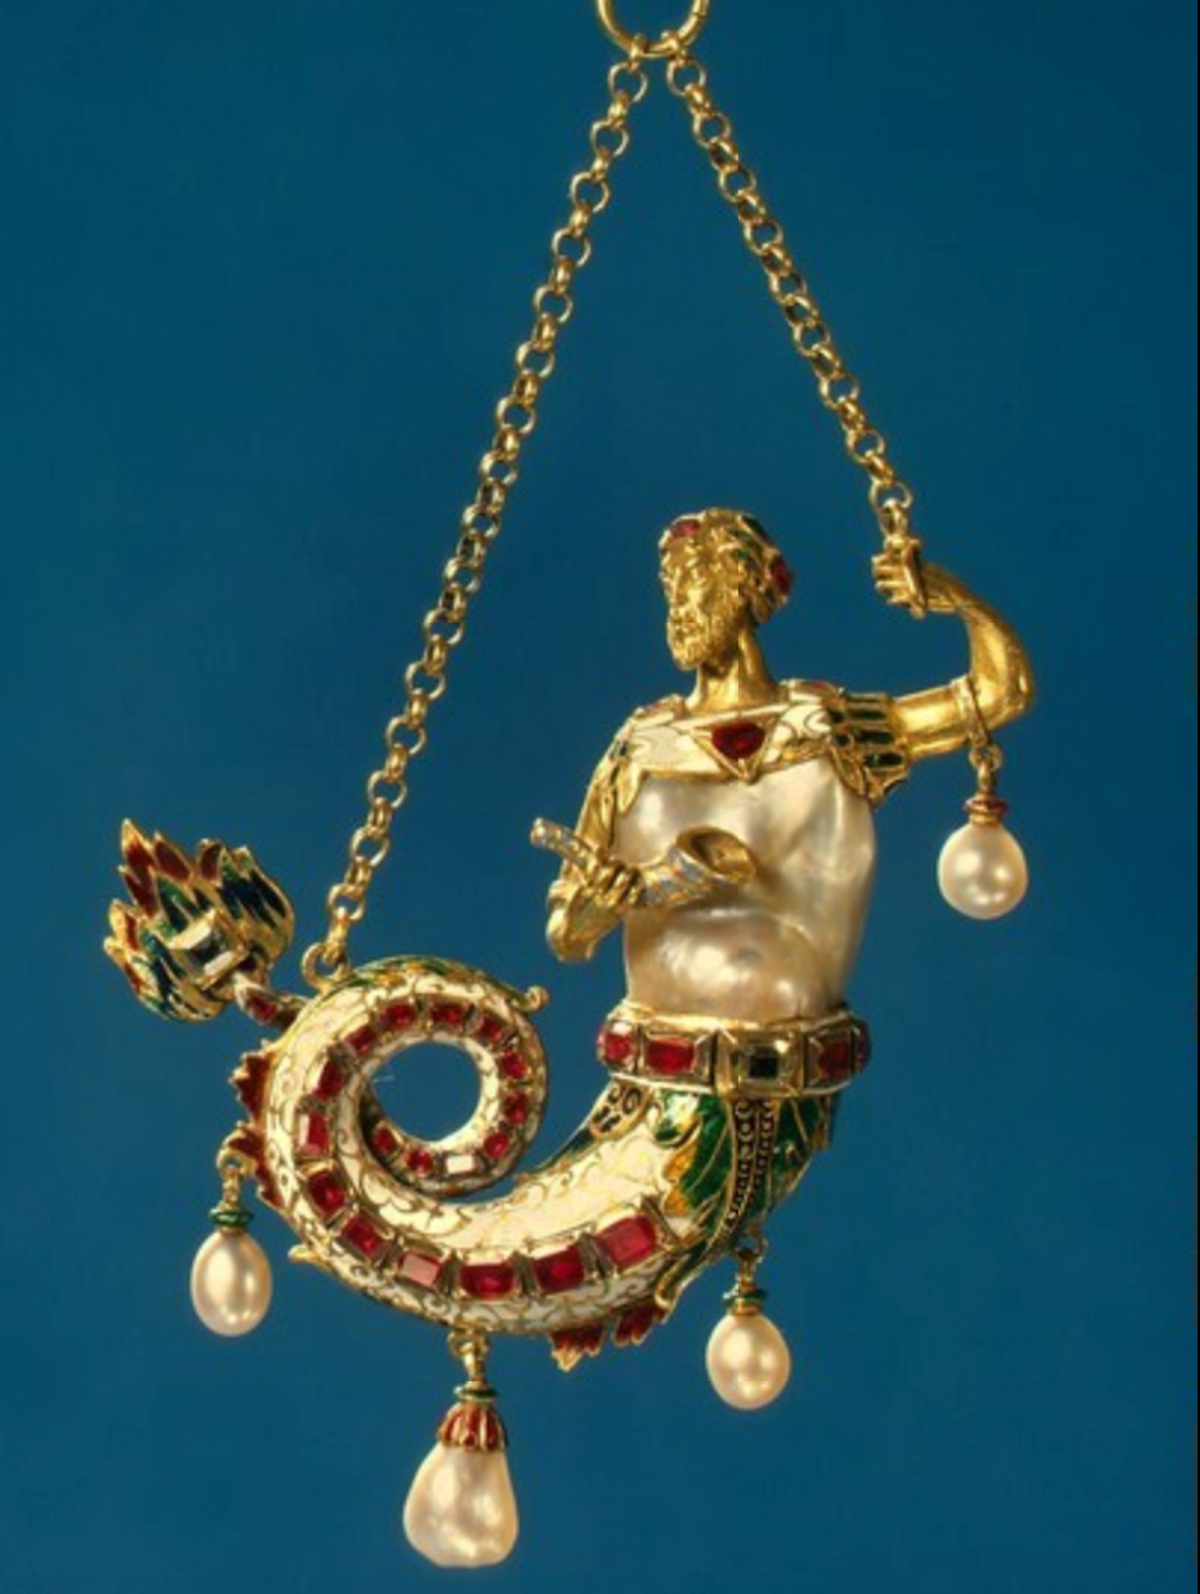 Alfred André, Pendant with a Triton, 1885/1890 Widener Collection, The National Gallery of Art